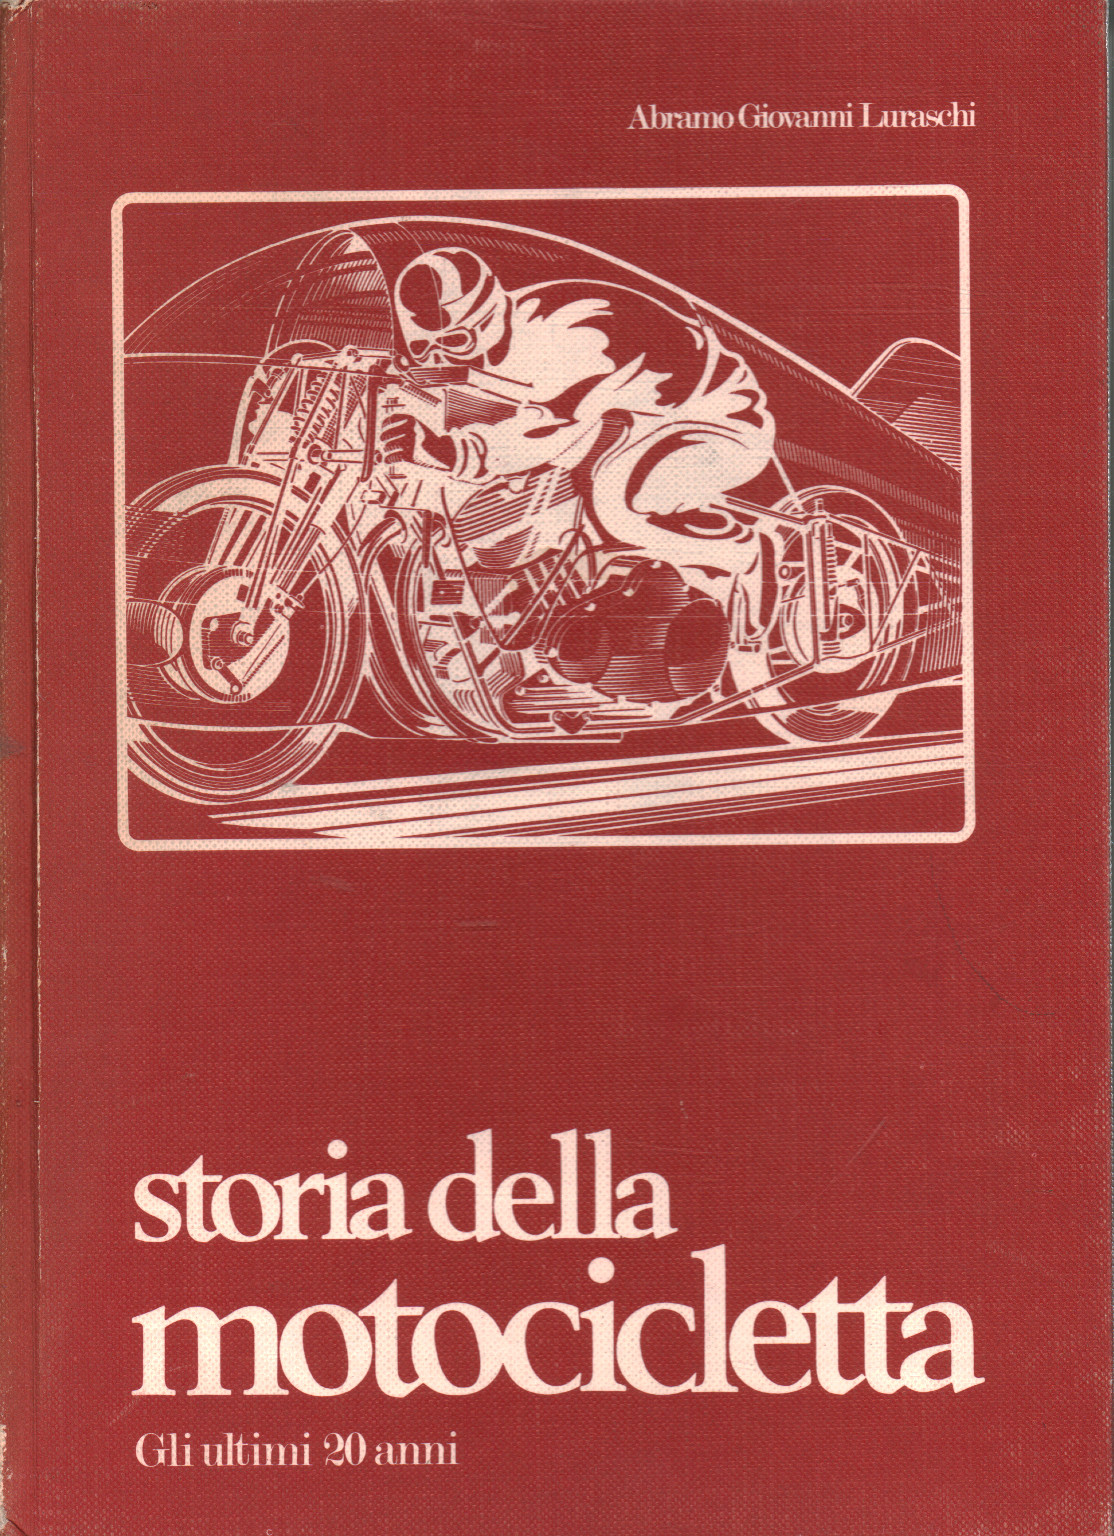 History of the motorcycle. The last 20 years, Abramo Giovanni Luraschi